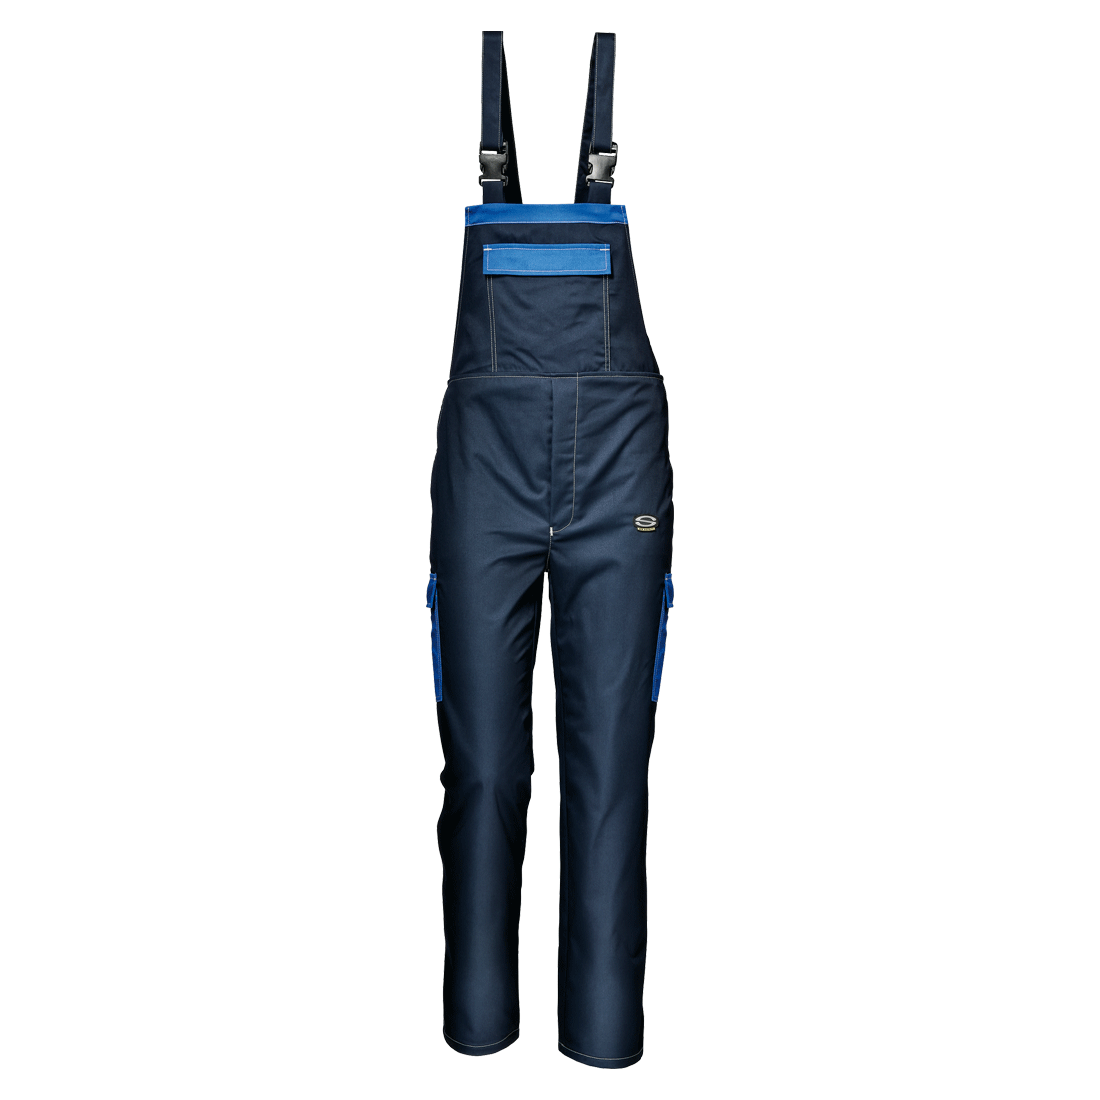 Sir Safety System | Work bib pants & coveralls